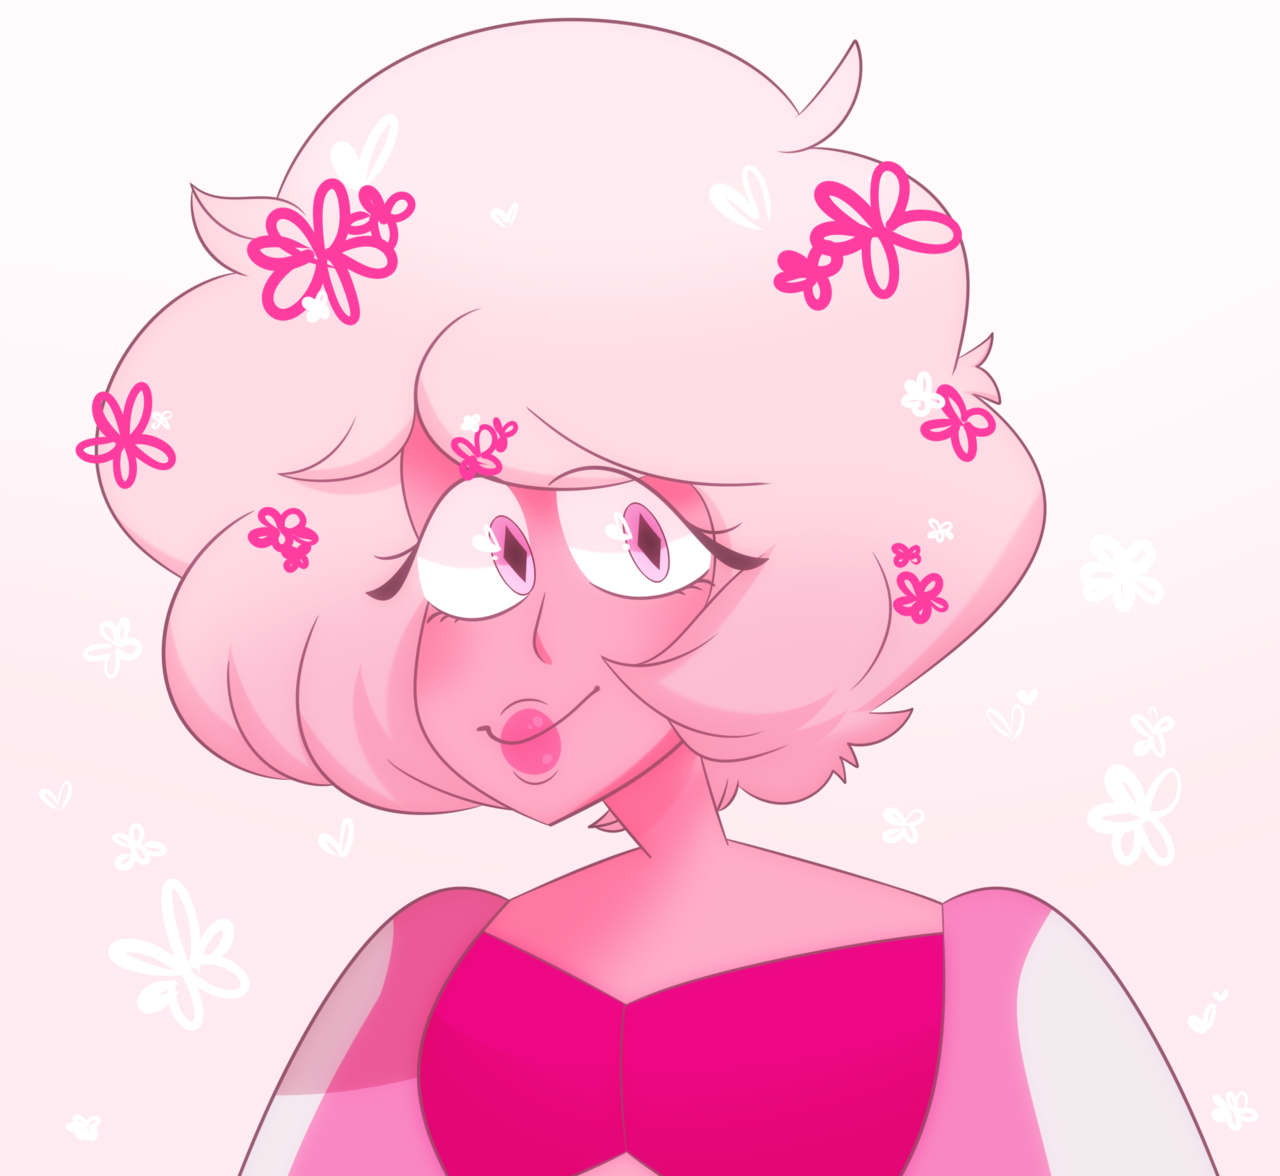 ♡ pretty pink ♡ (also a speedpaint if you’re interested ♡ : https://www.youtube.com/watch?v=BbmiSCIedBA&feature=youtu.be)